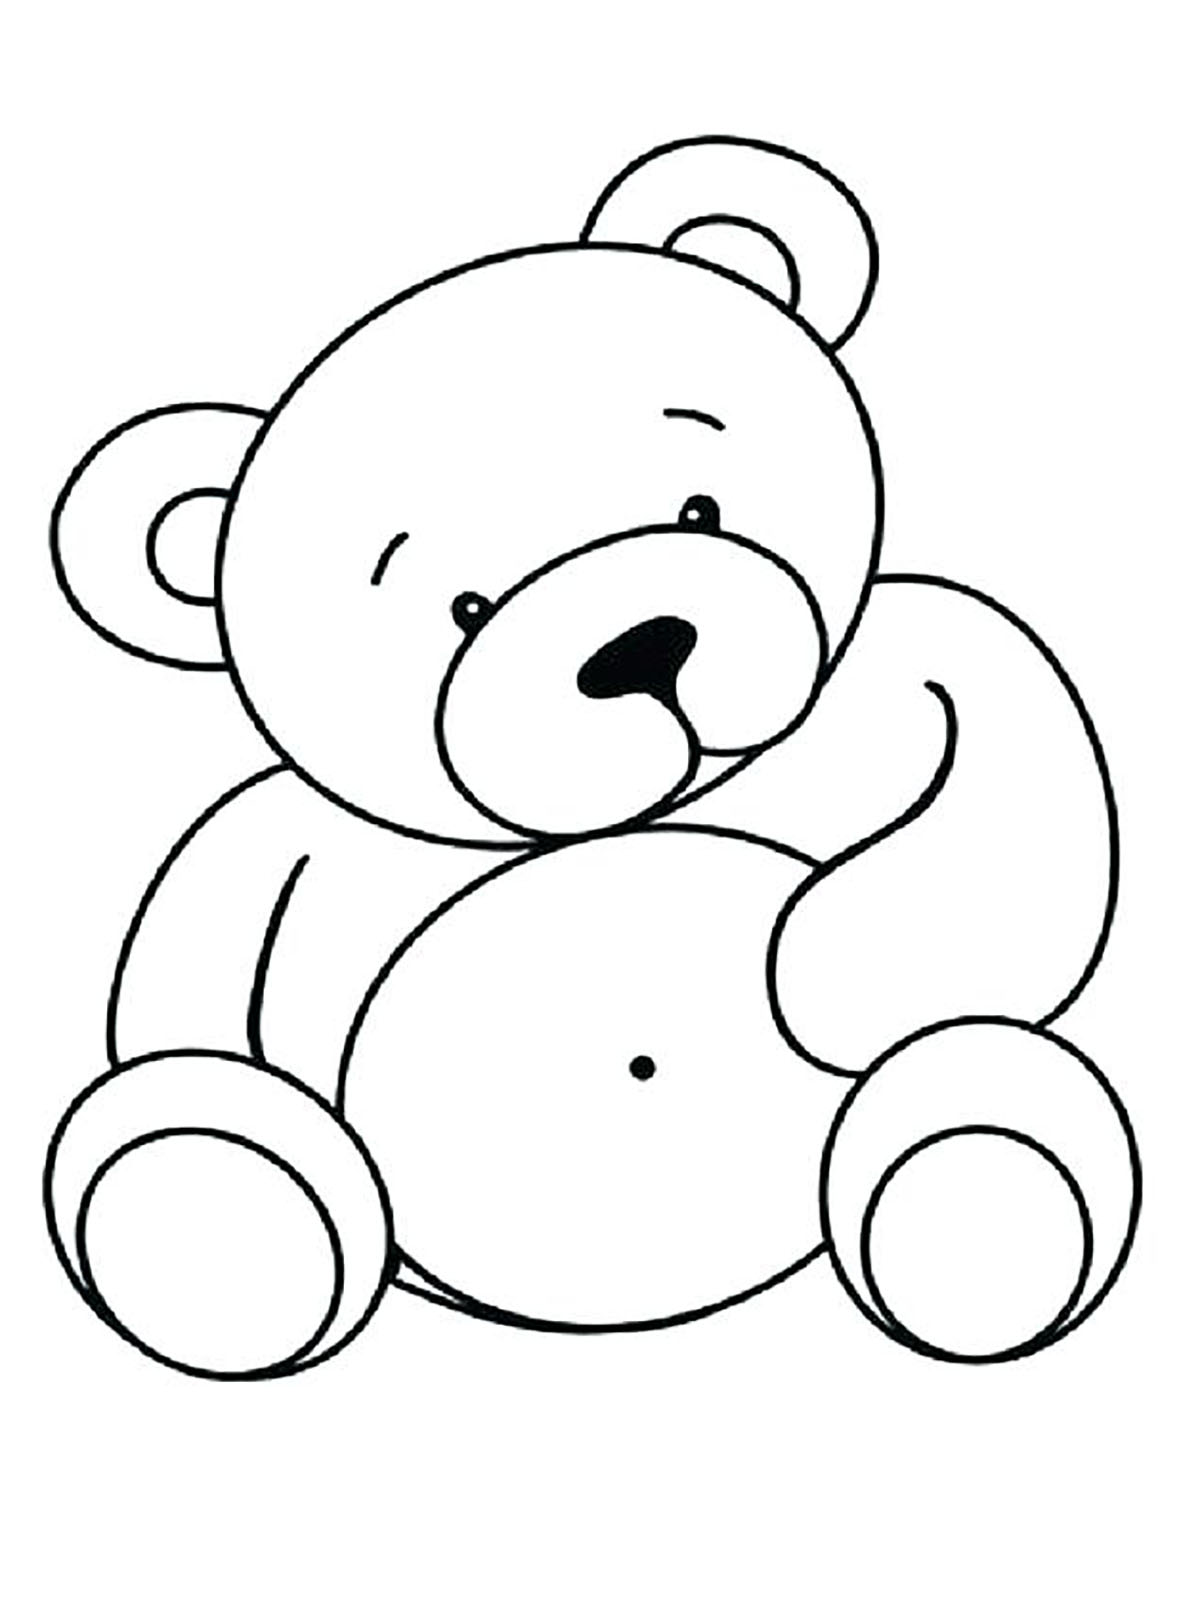 Big bellied bear   Bears Kids Coloring Pages